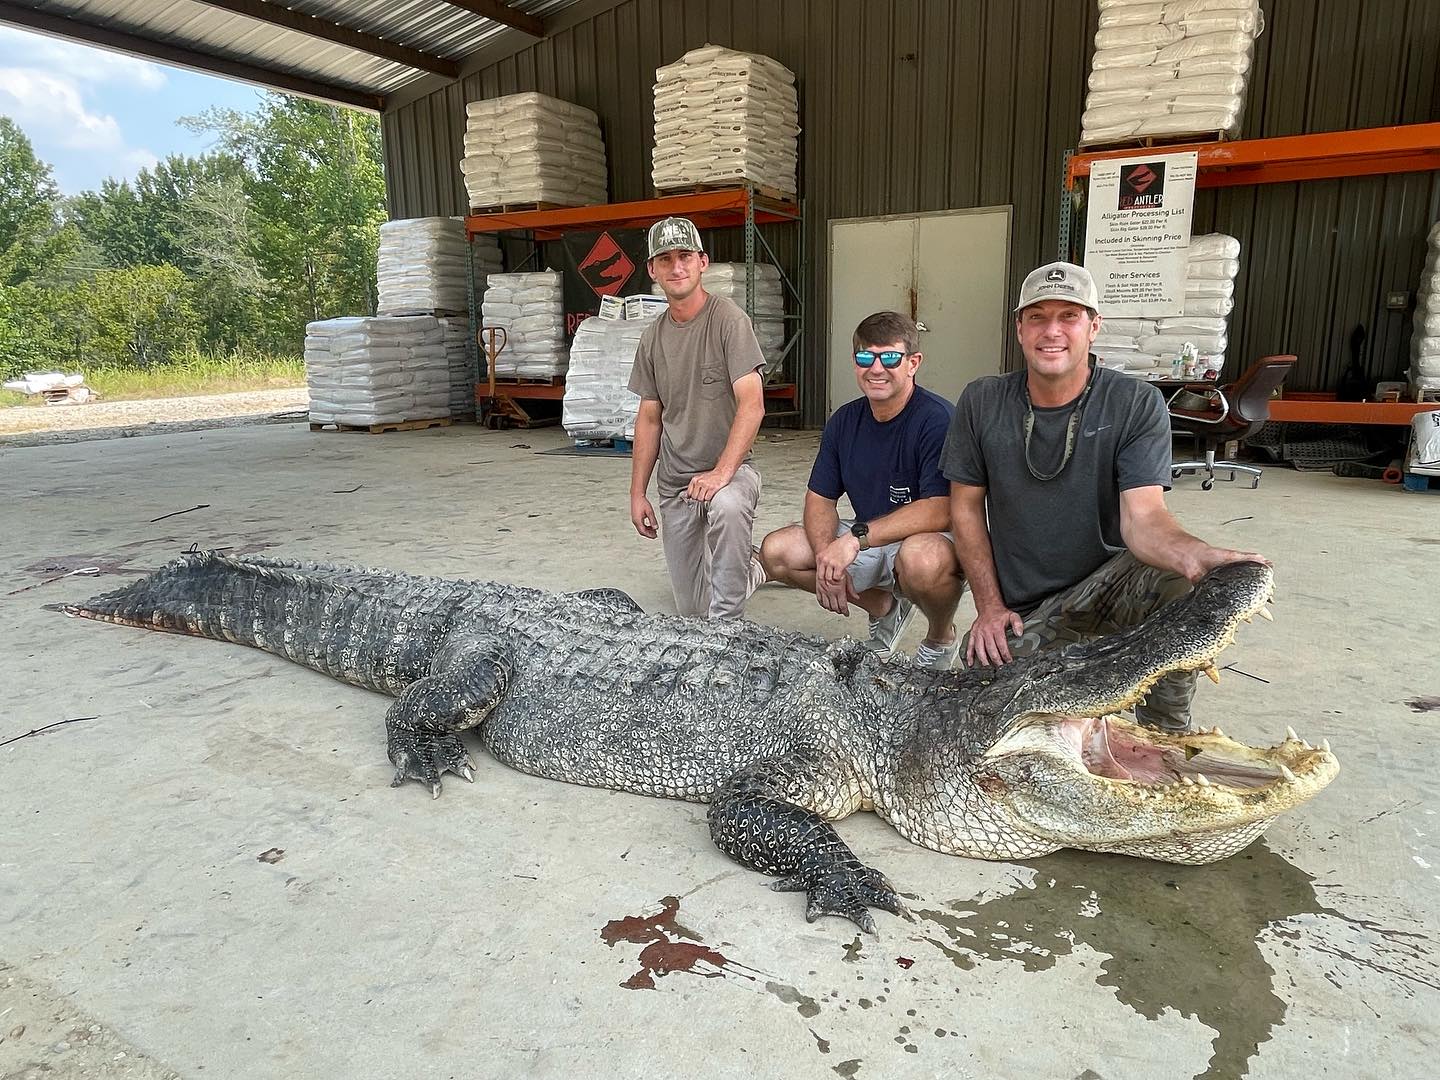 The new giant gator out of Mississippi.